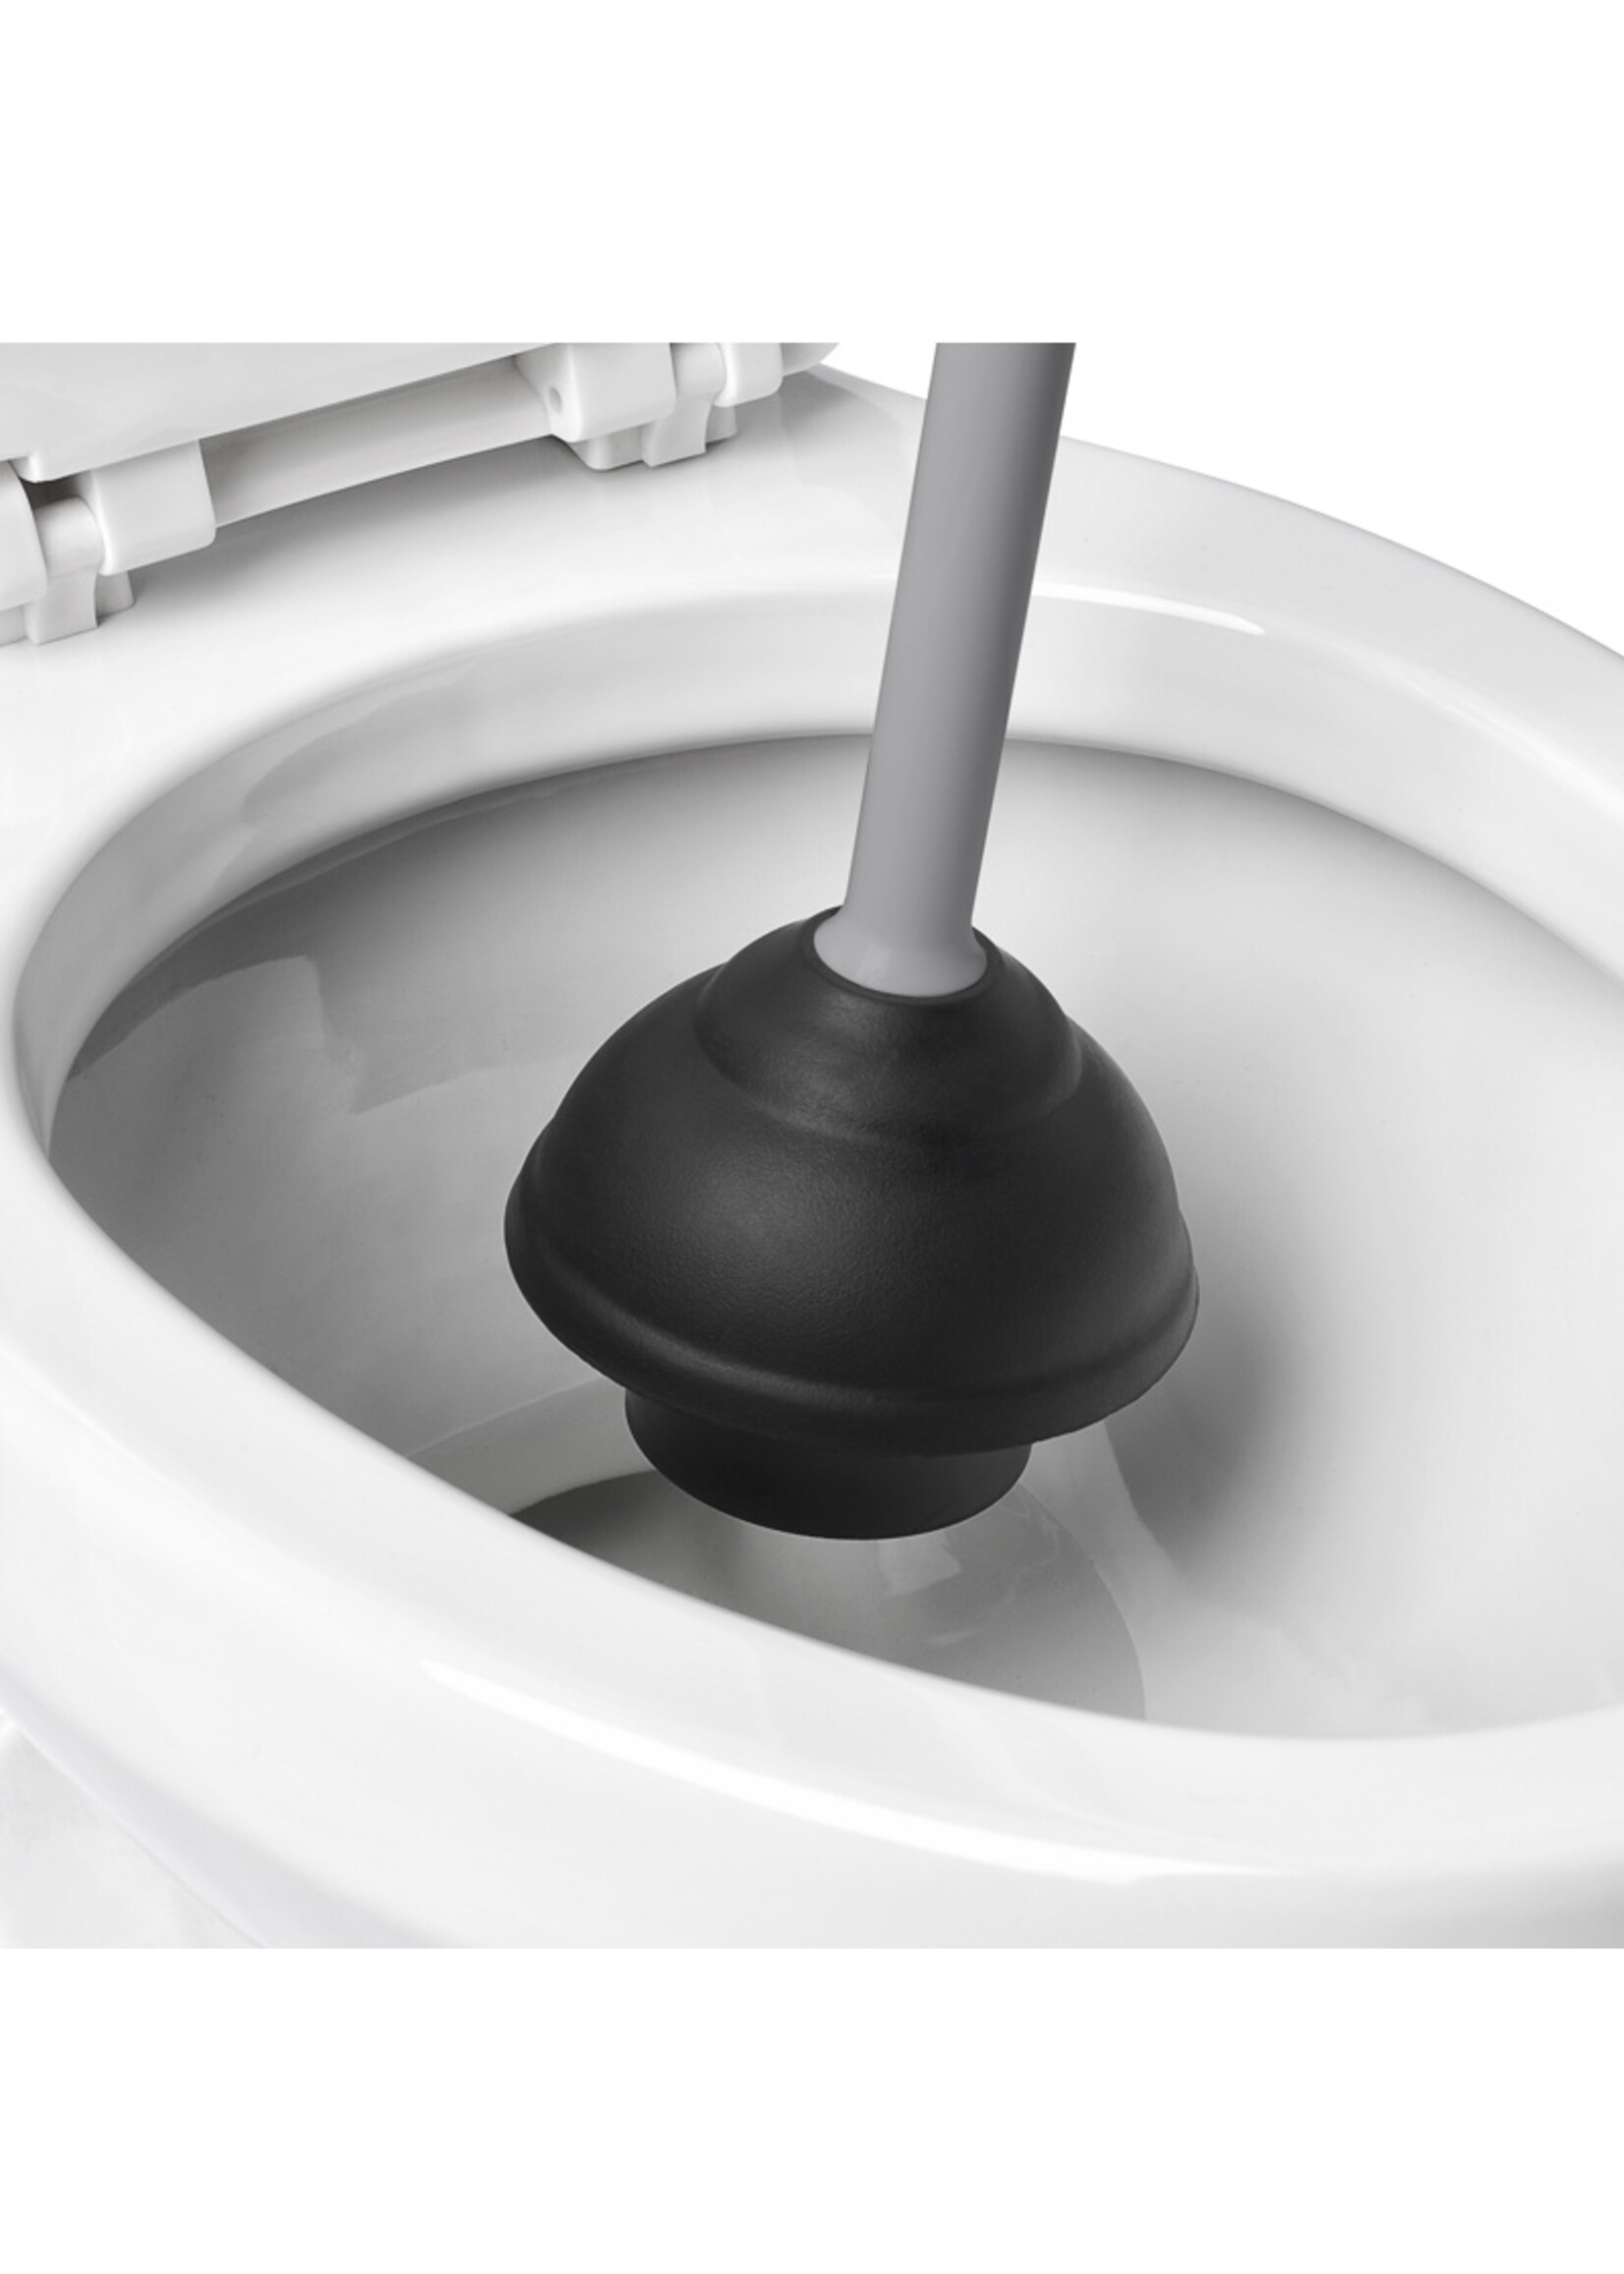 Danesco OXO Toilet Plunger with Storage Caddy